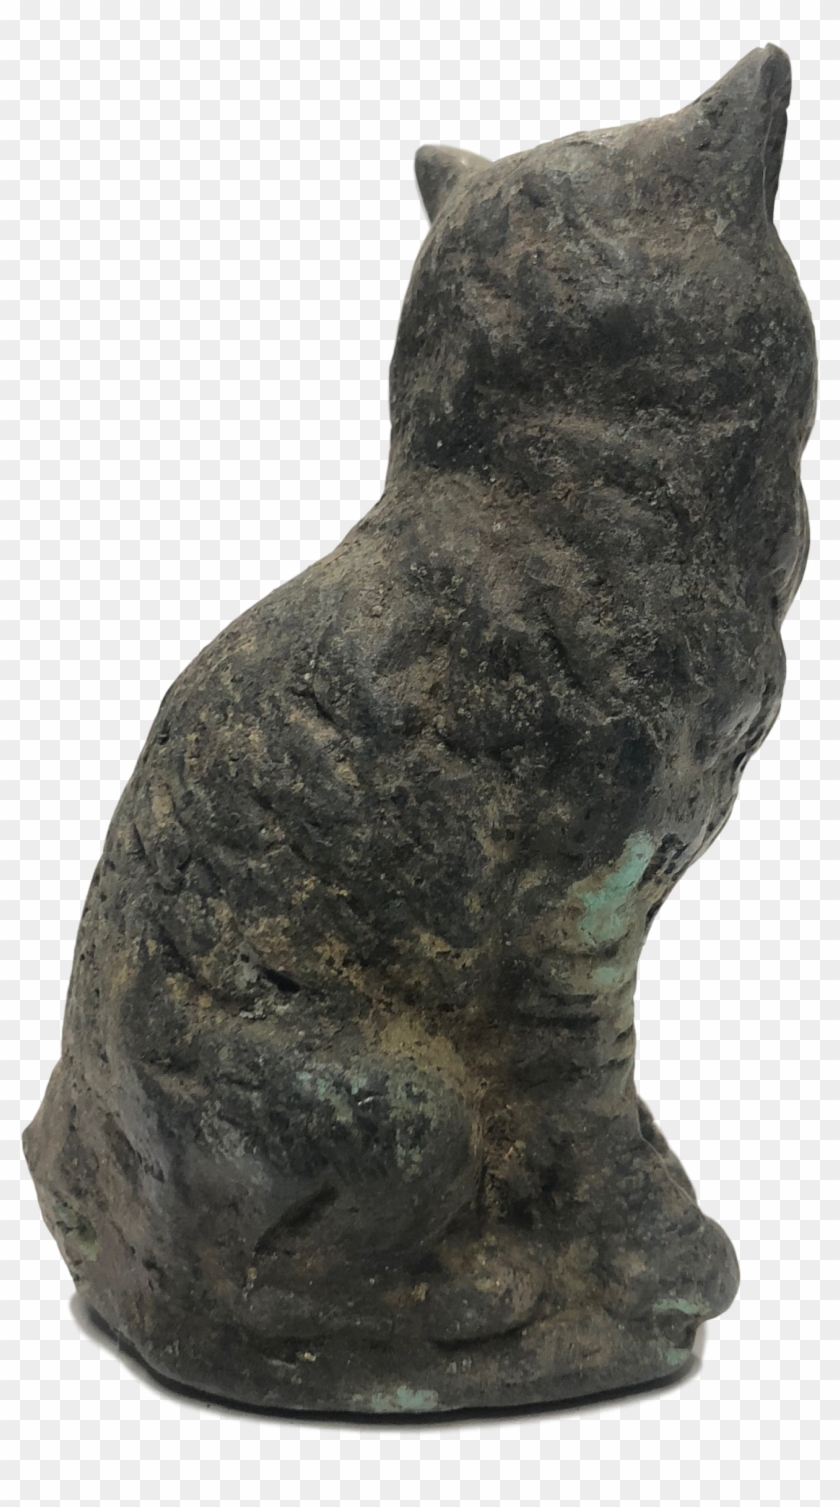 Primitive Cast Of A Fluffy Cat From Java, Indonesia - Statue Clipart #3760988